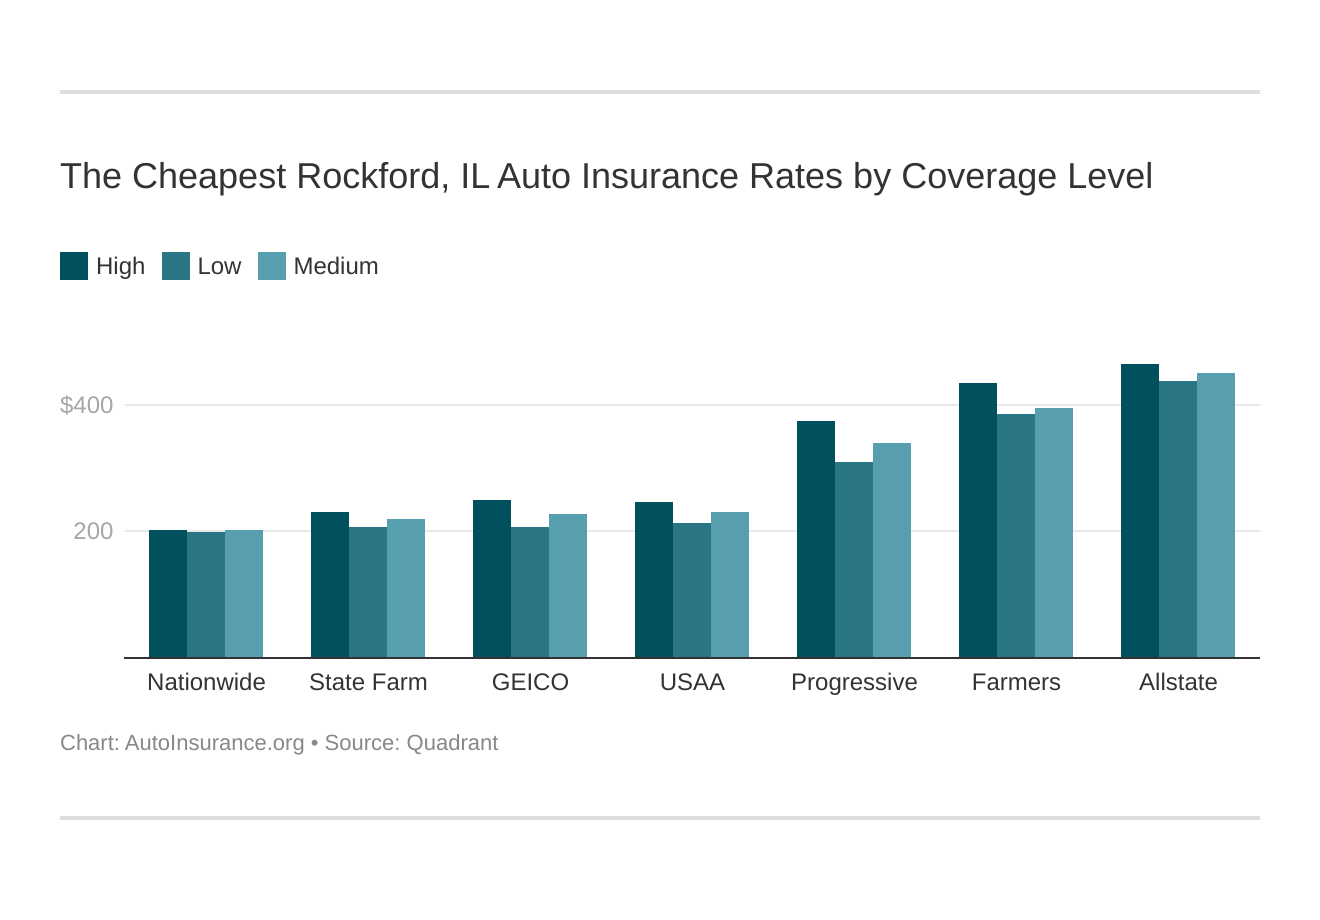 The Cheapest Rockford, IL Auto Insurance Rates by Coverage Level